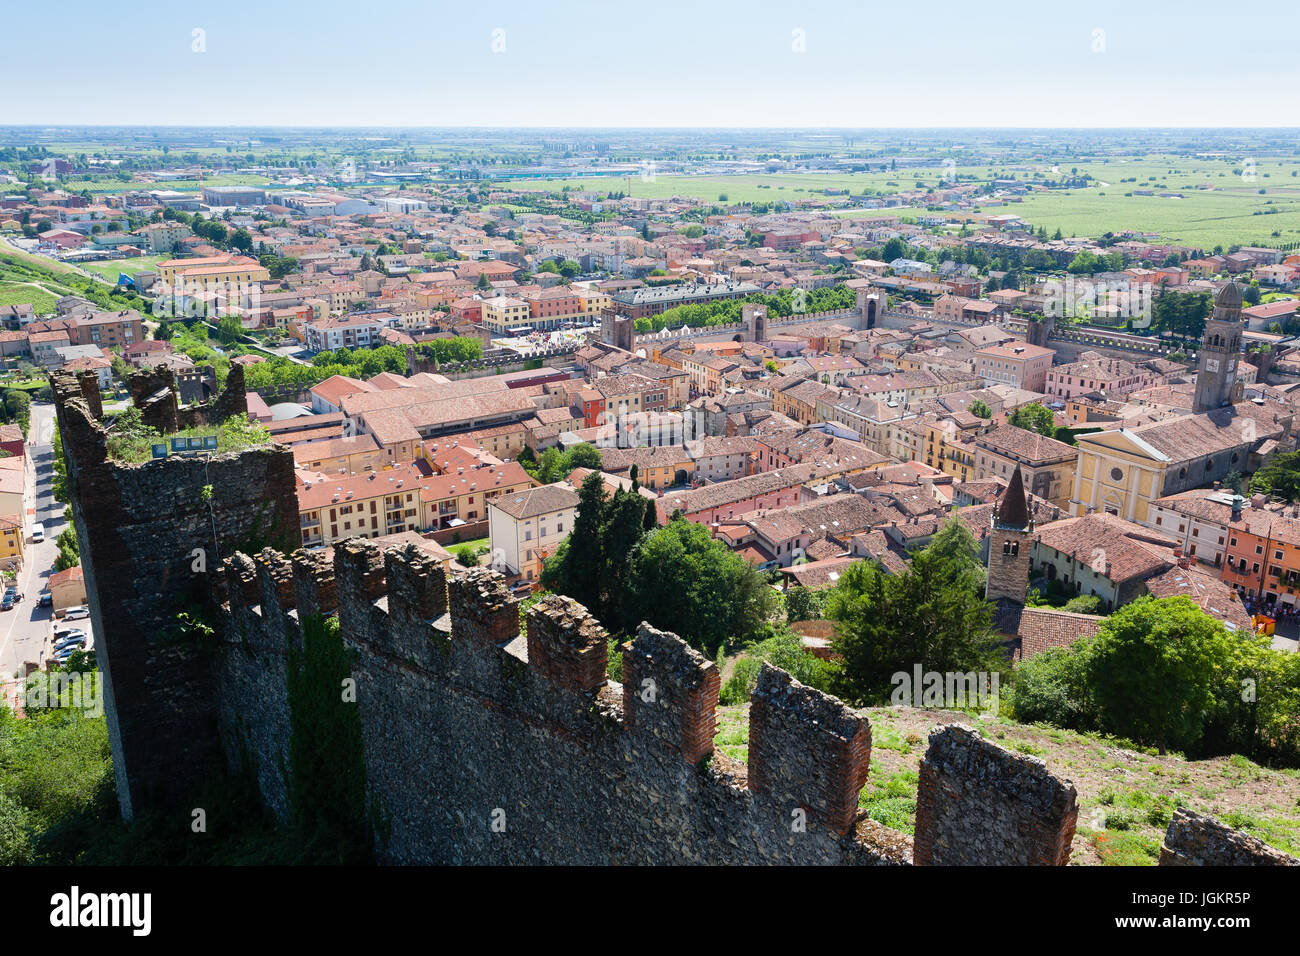 Aerial view of Soave, medieval walled city in Italy. Famous wine area. Italian countryside Stock Photo